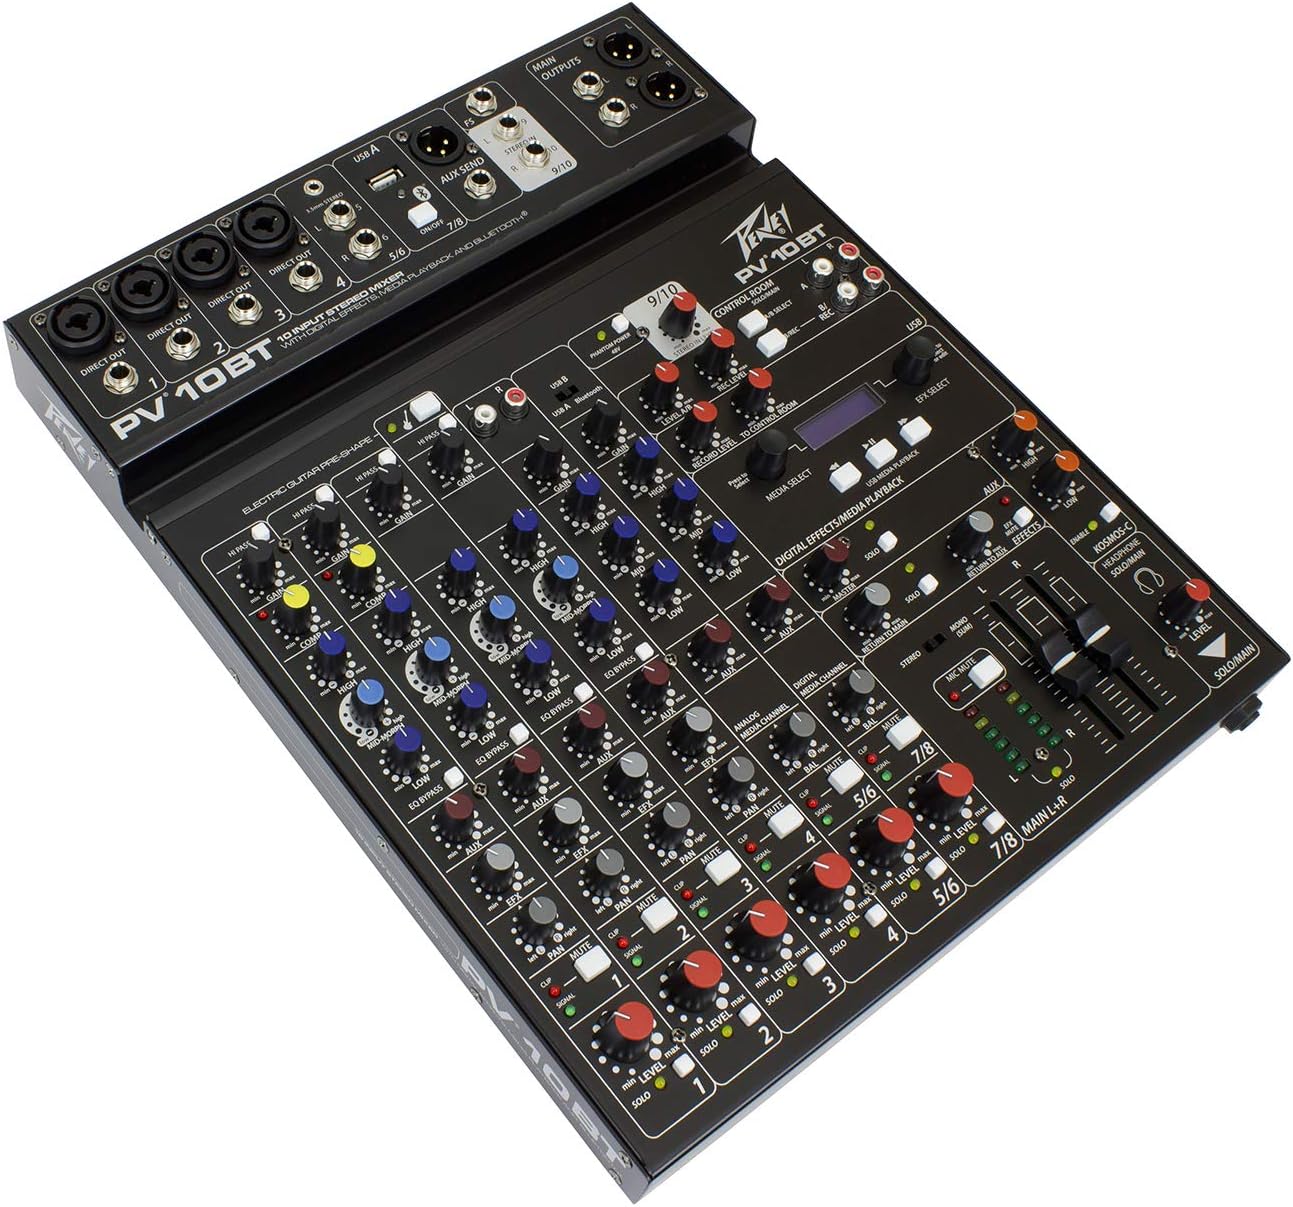 Peavey PV 10 BT 10 Channel Compact Mixing Mixer Console with Bluetooth + PVI 100 Microphone